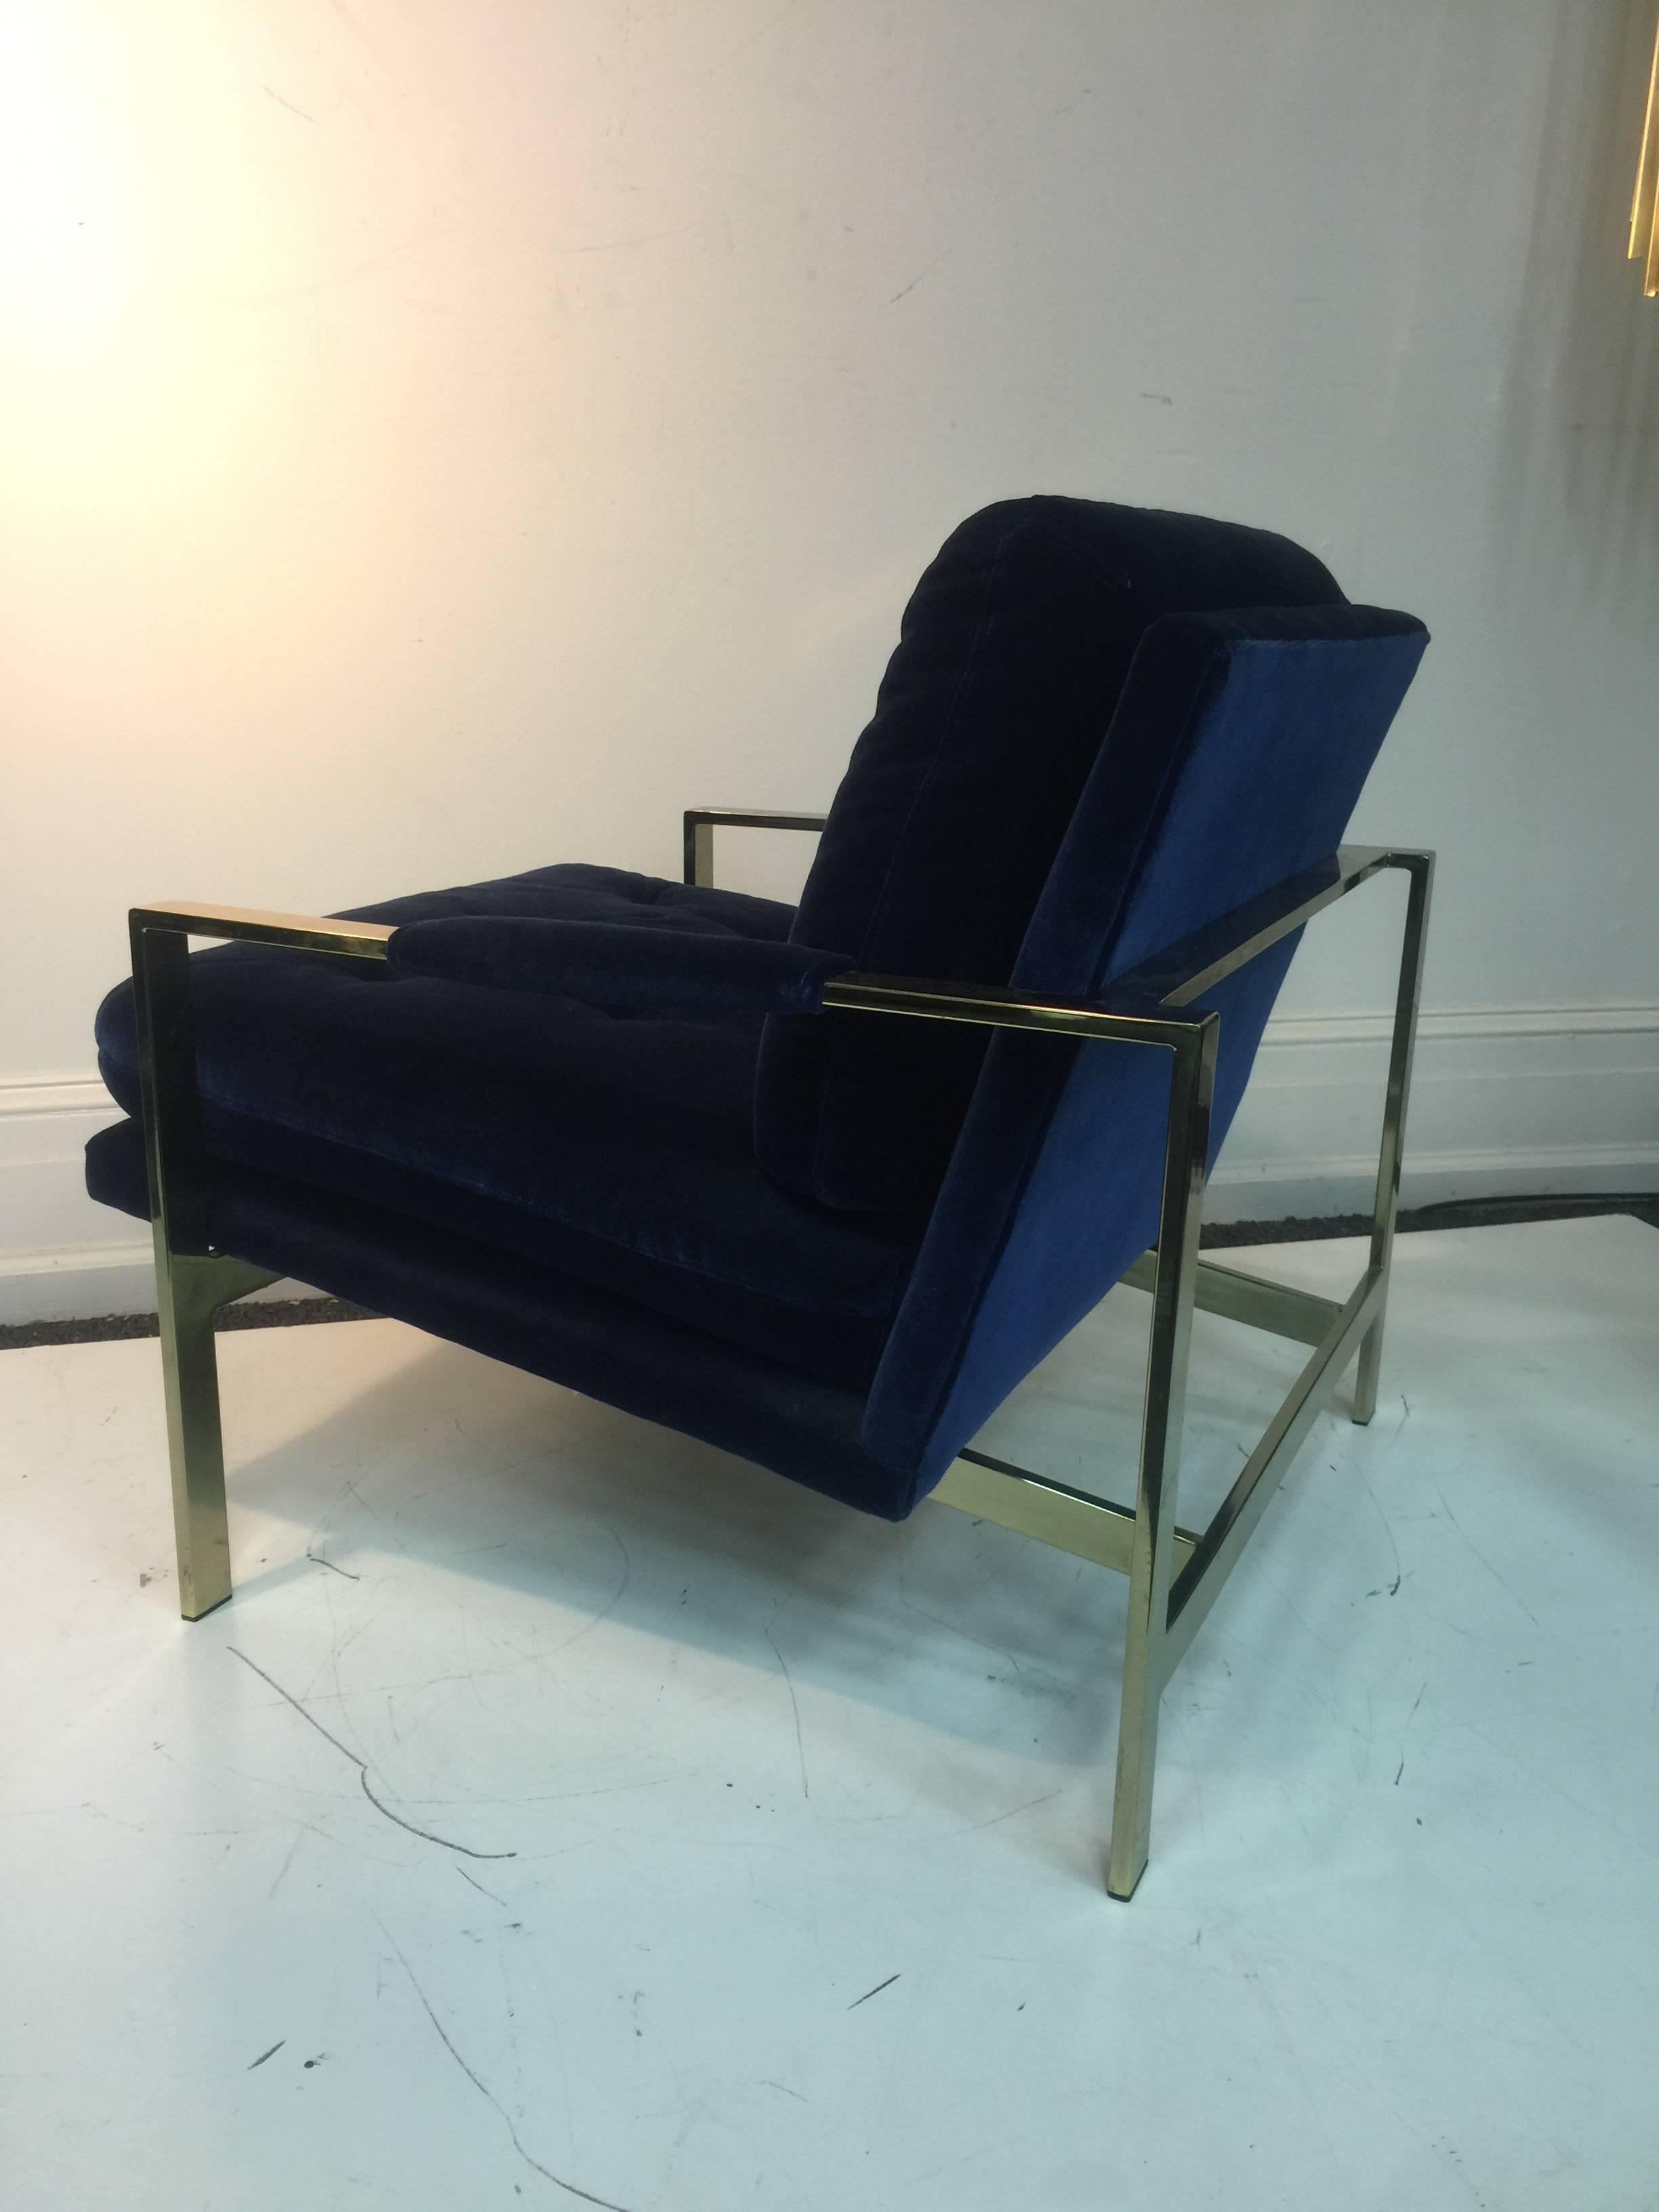 American Luxurious Milo Baughman Lounge Chair Upholstered in Lush Blue Velvet For Sale